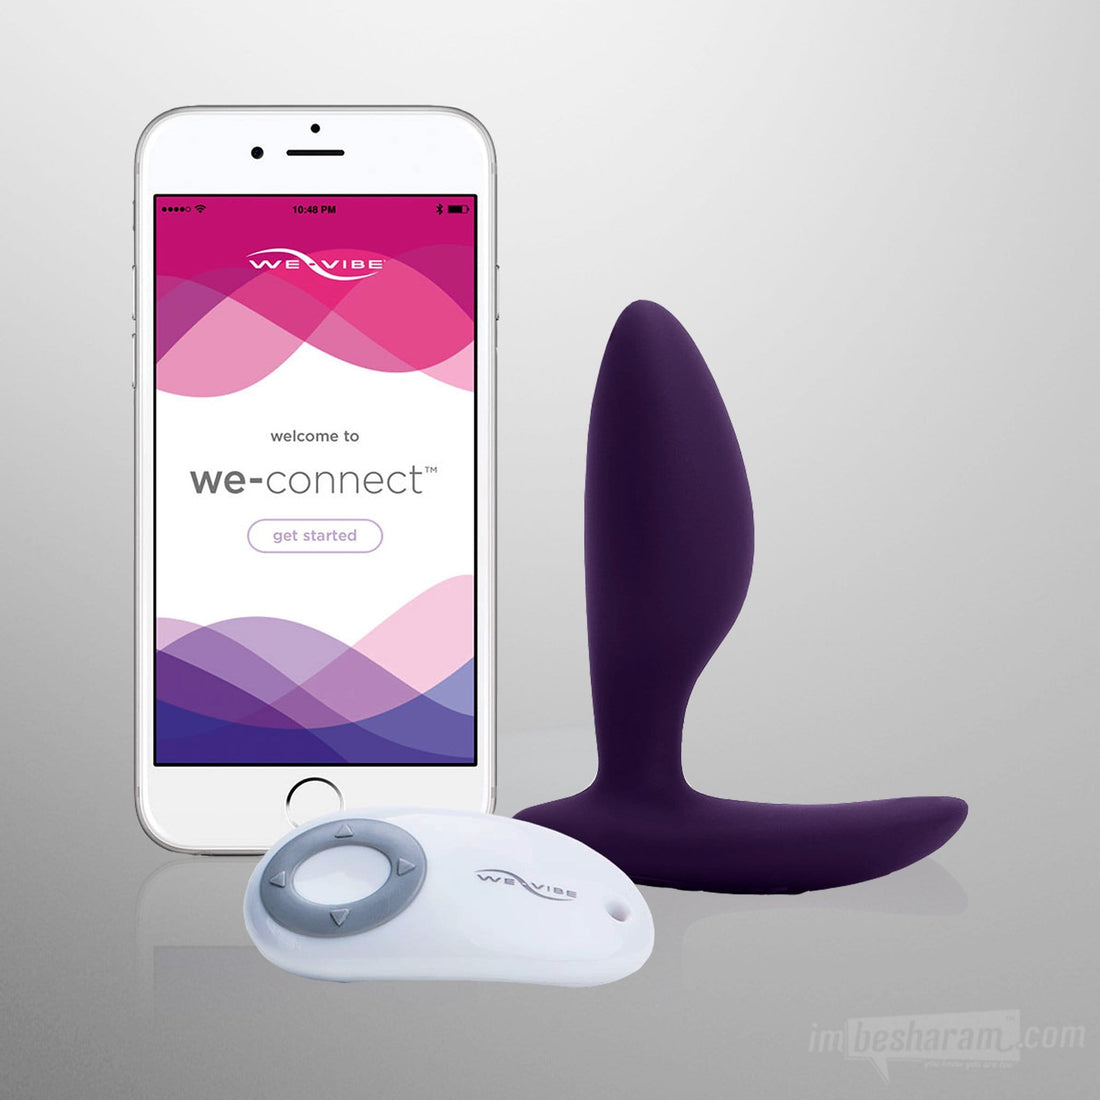 We-Vibe Ditto Vibrating Plug In-App